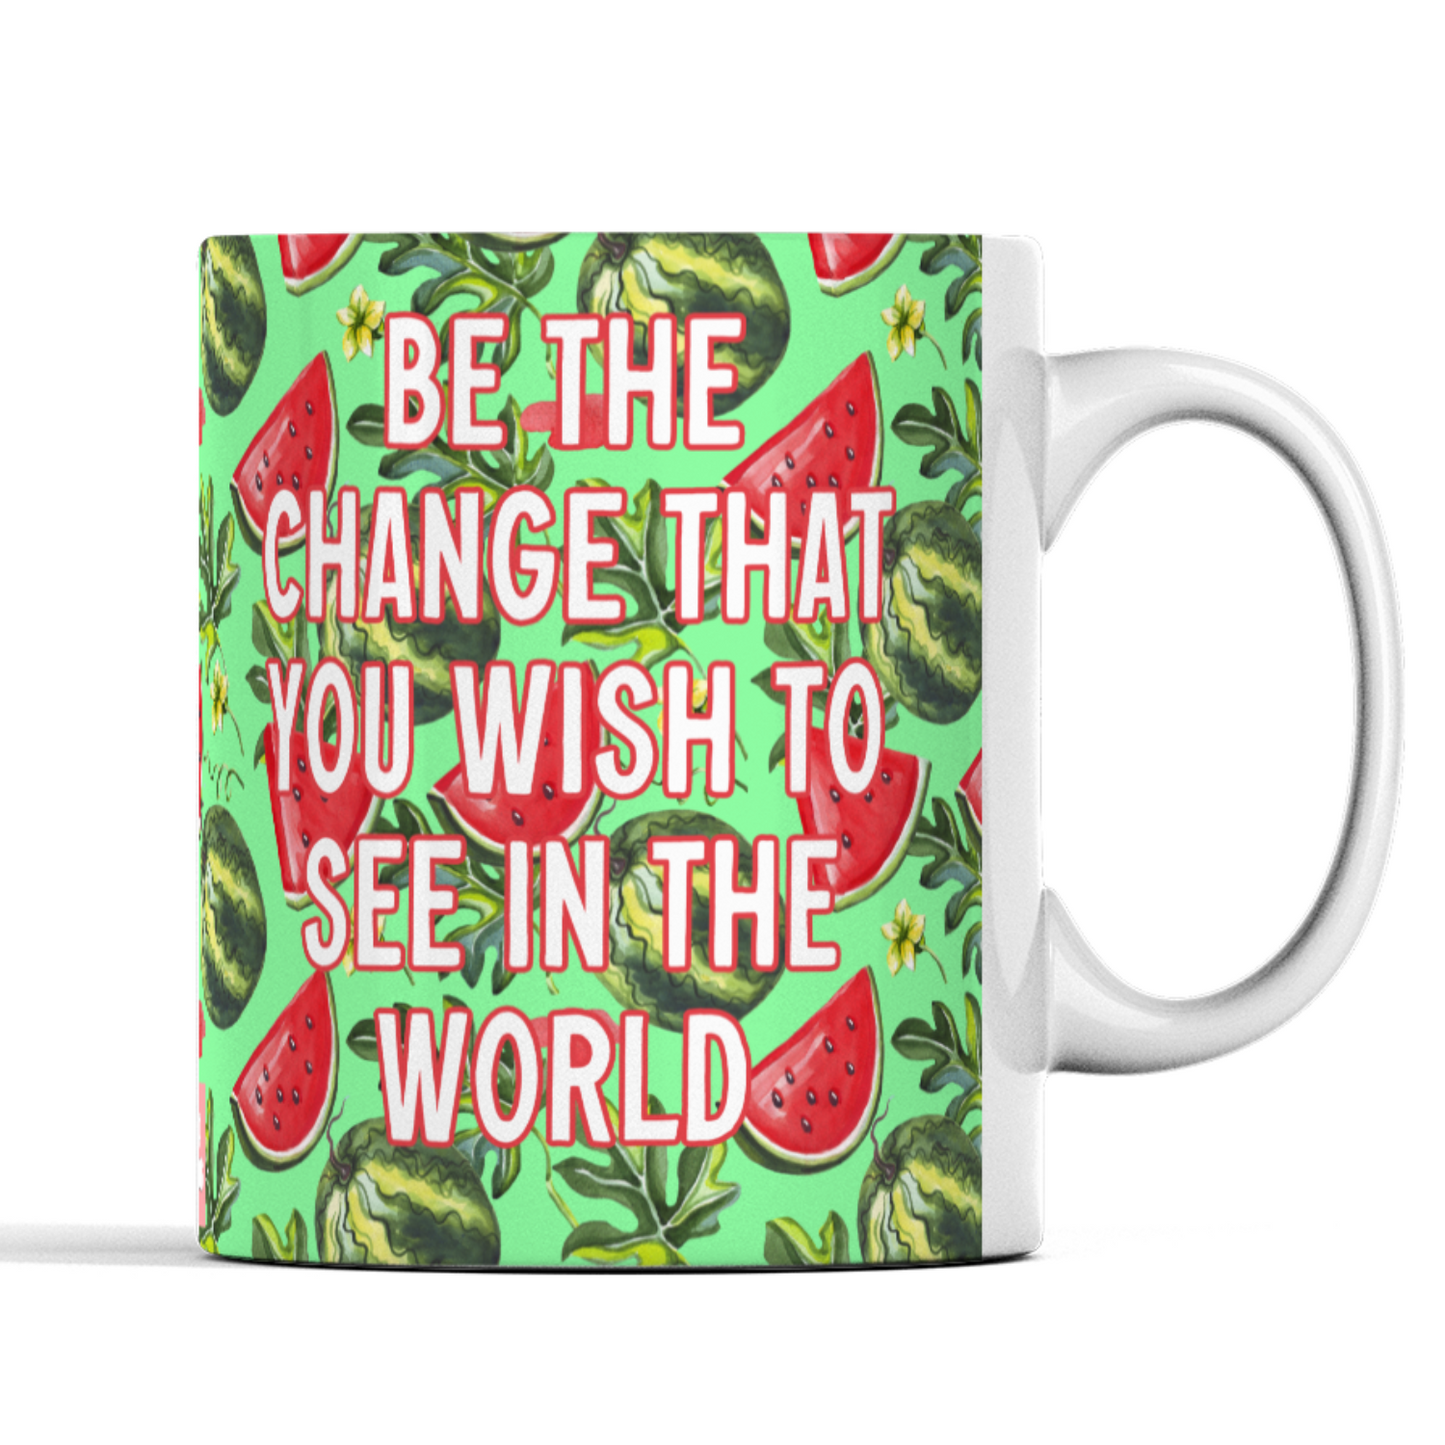 Be the change you wish to see in the world watermelon positive quote mug